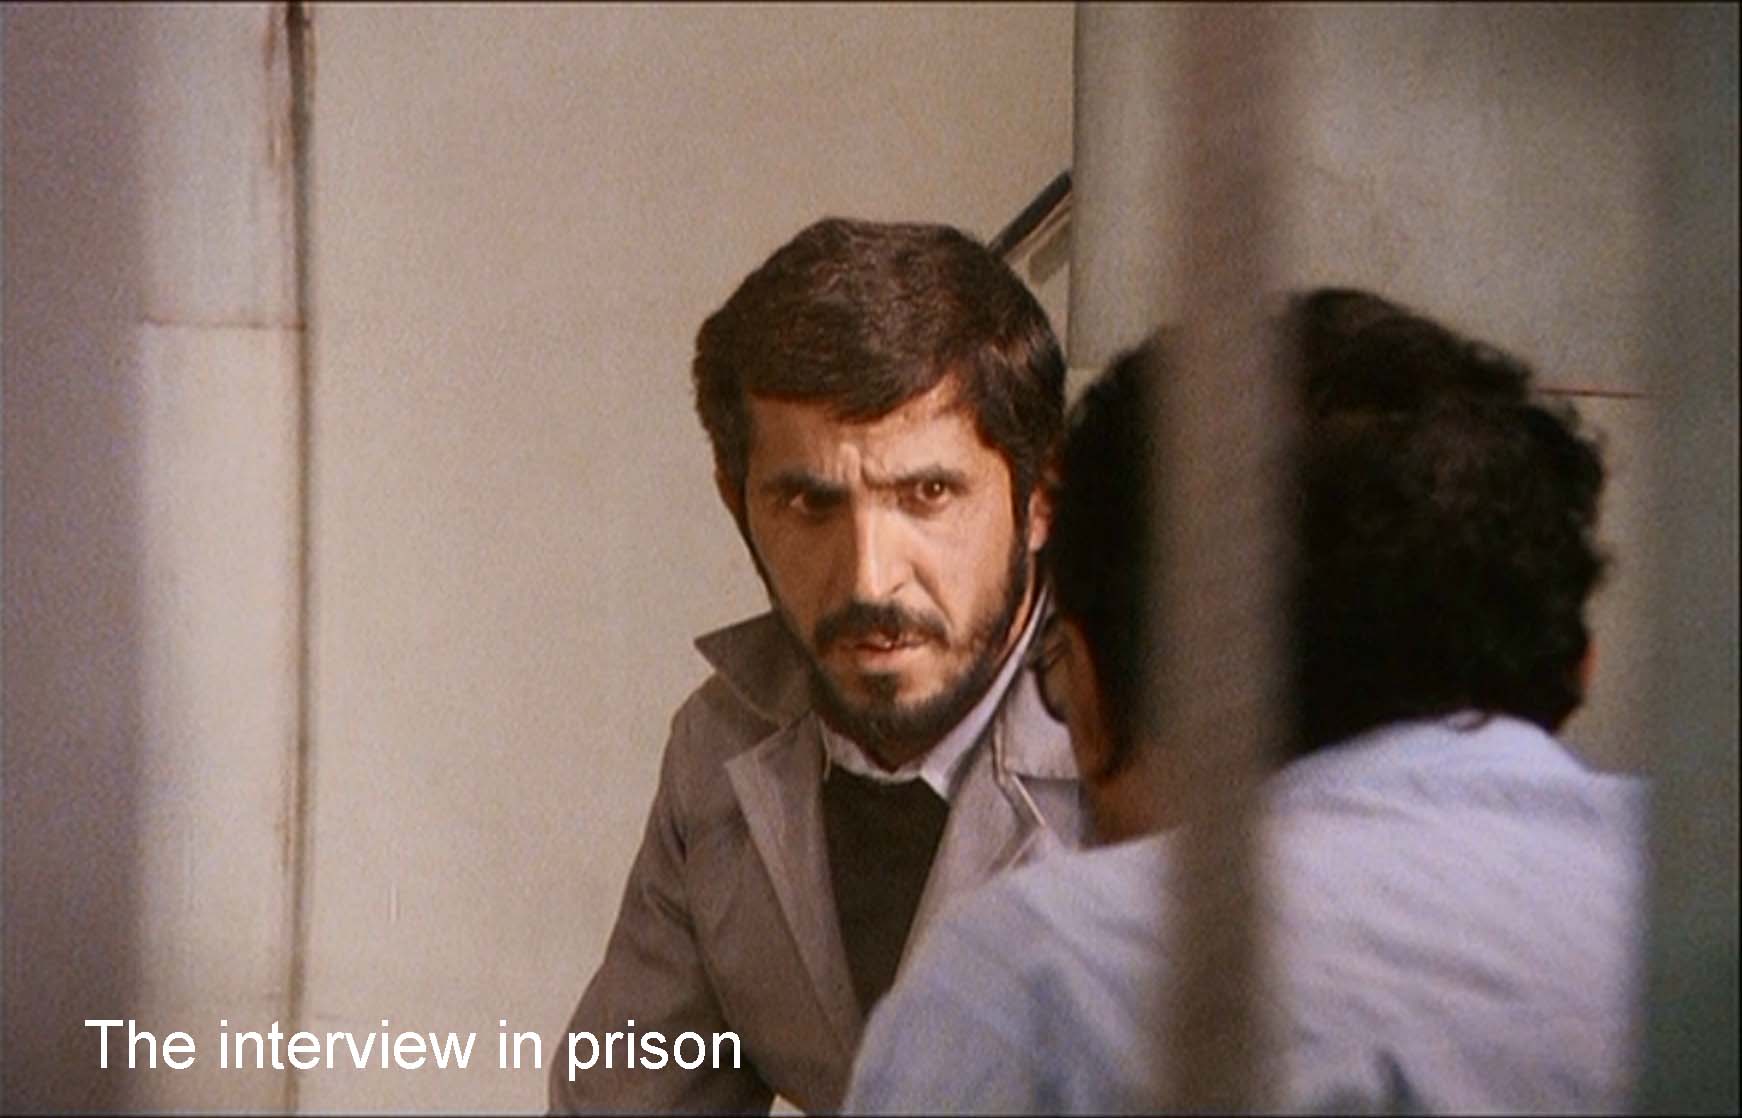 The interview in prison